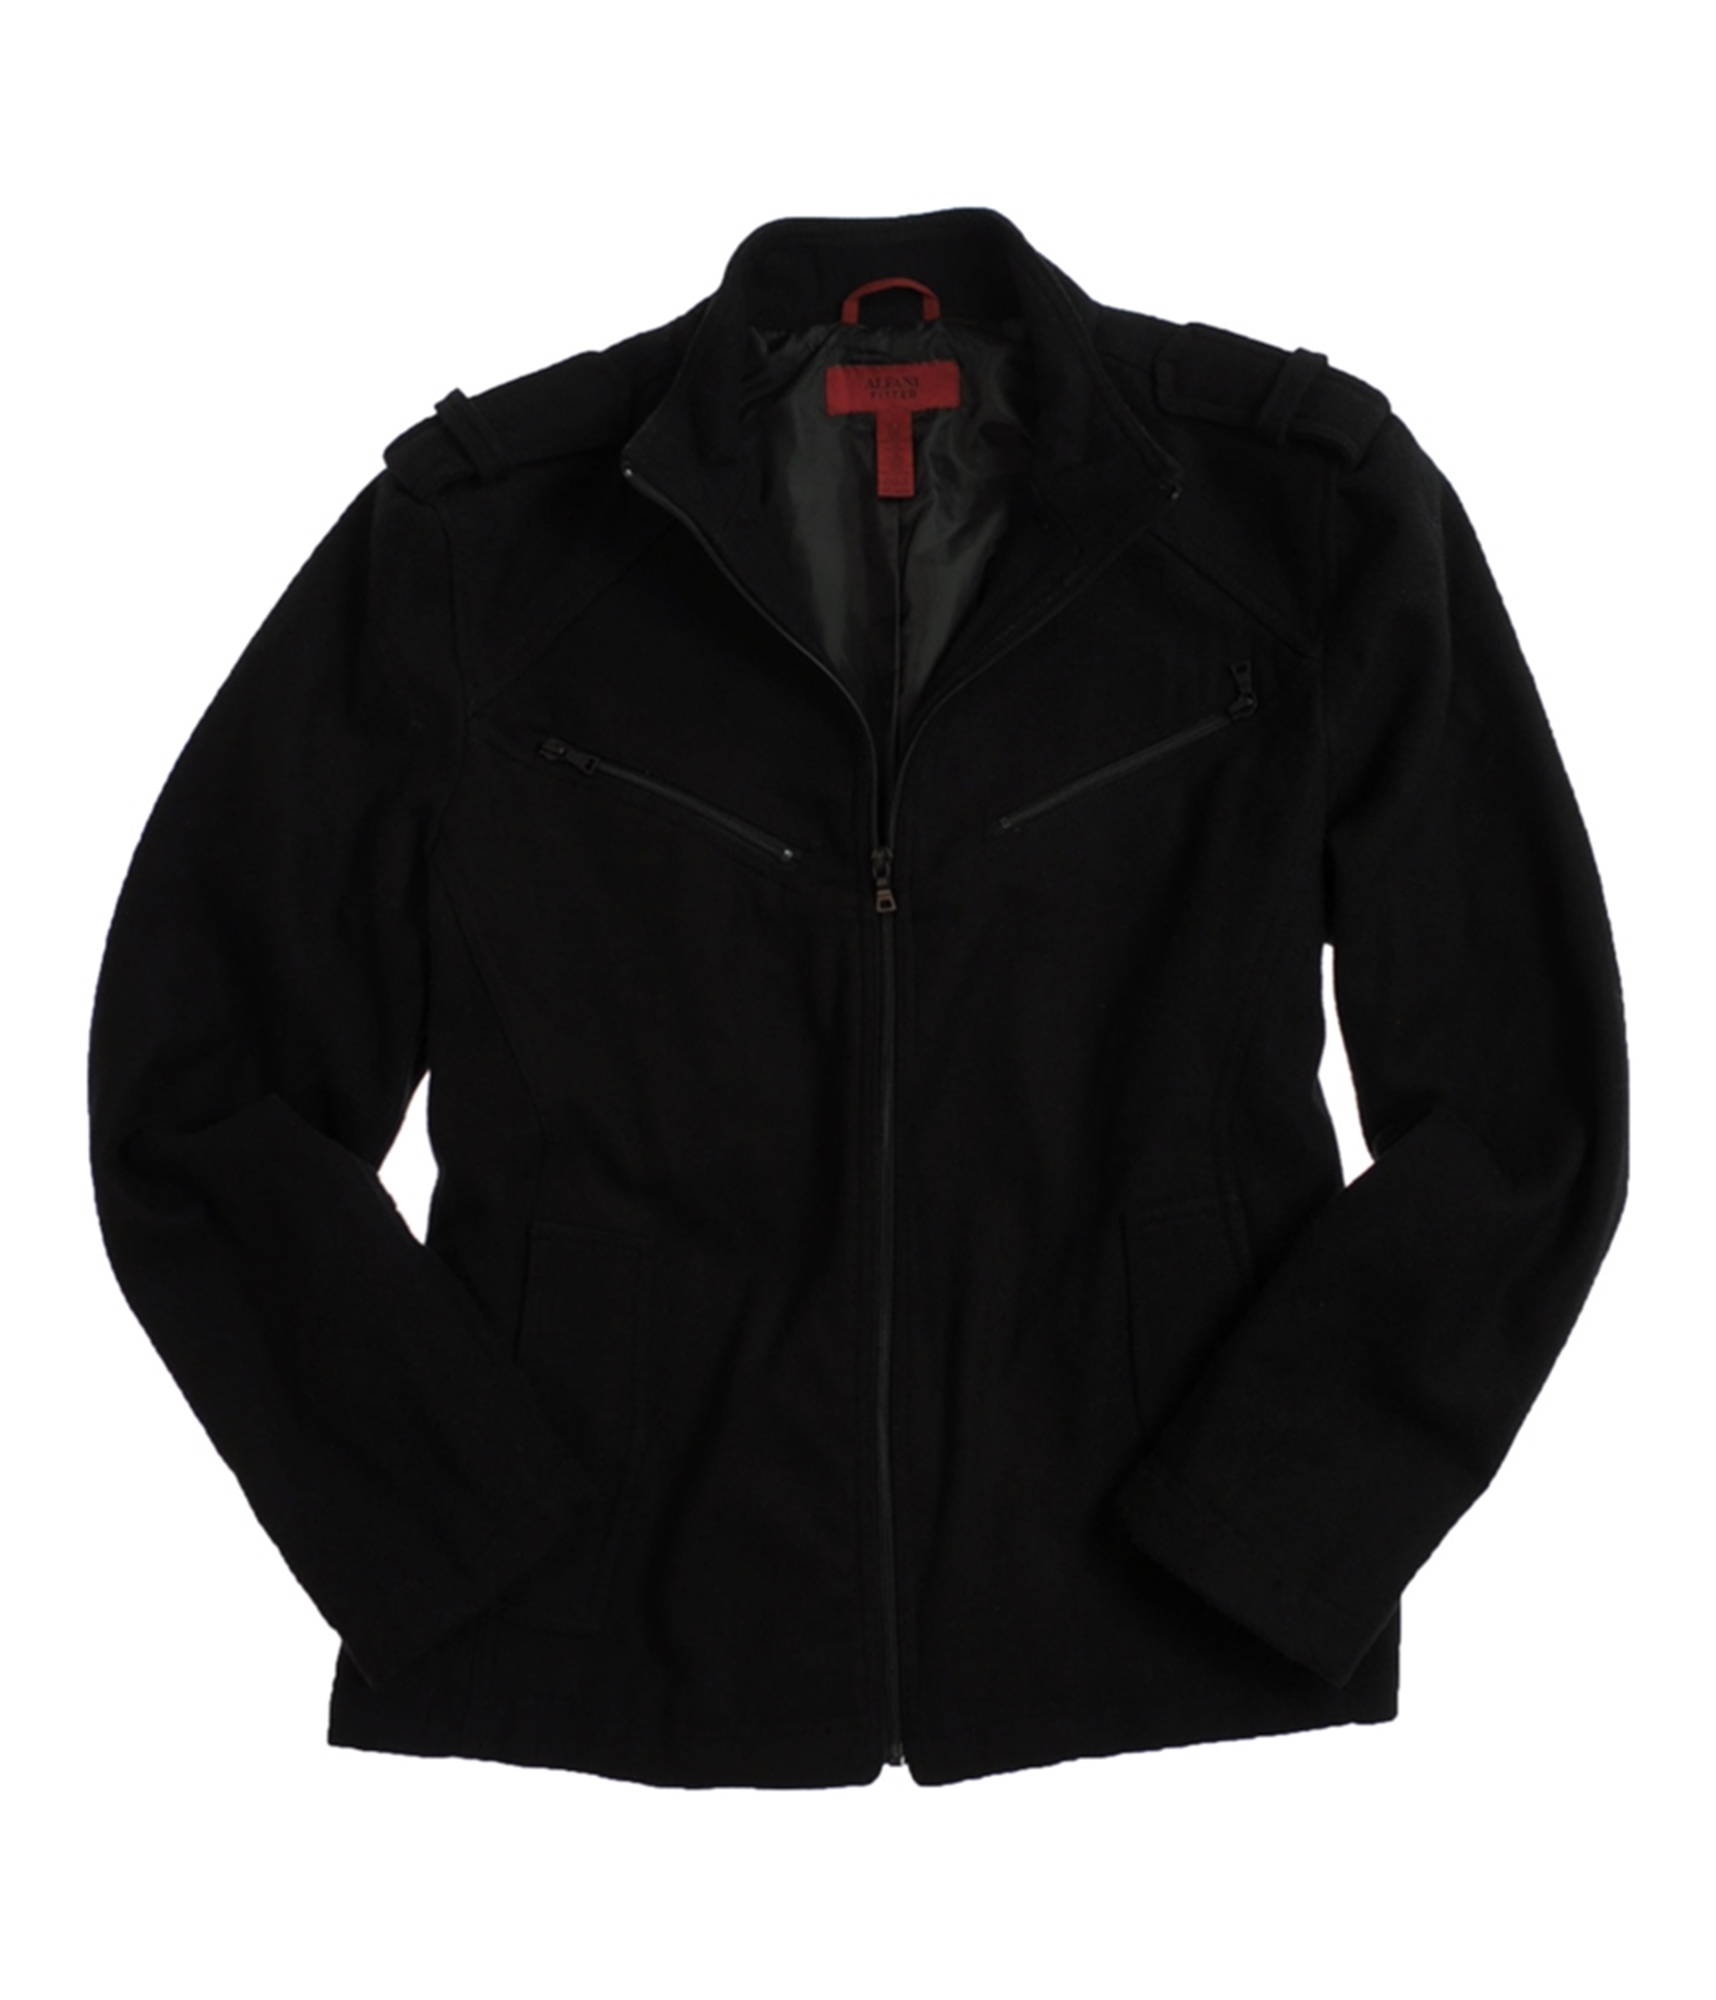 Buy a Mens Alfani Fitted Wool Basic Field Jacket Online | TagsWeekly.com